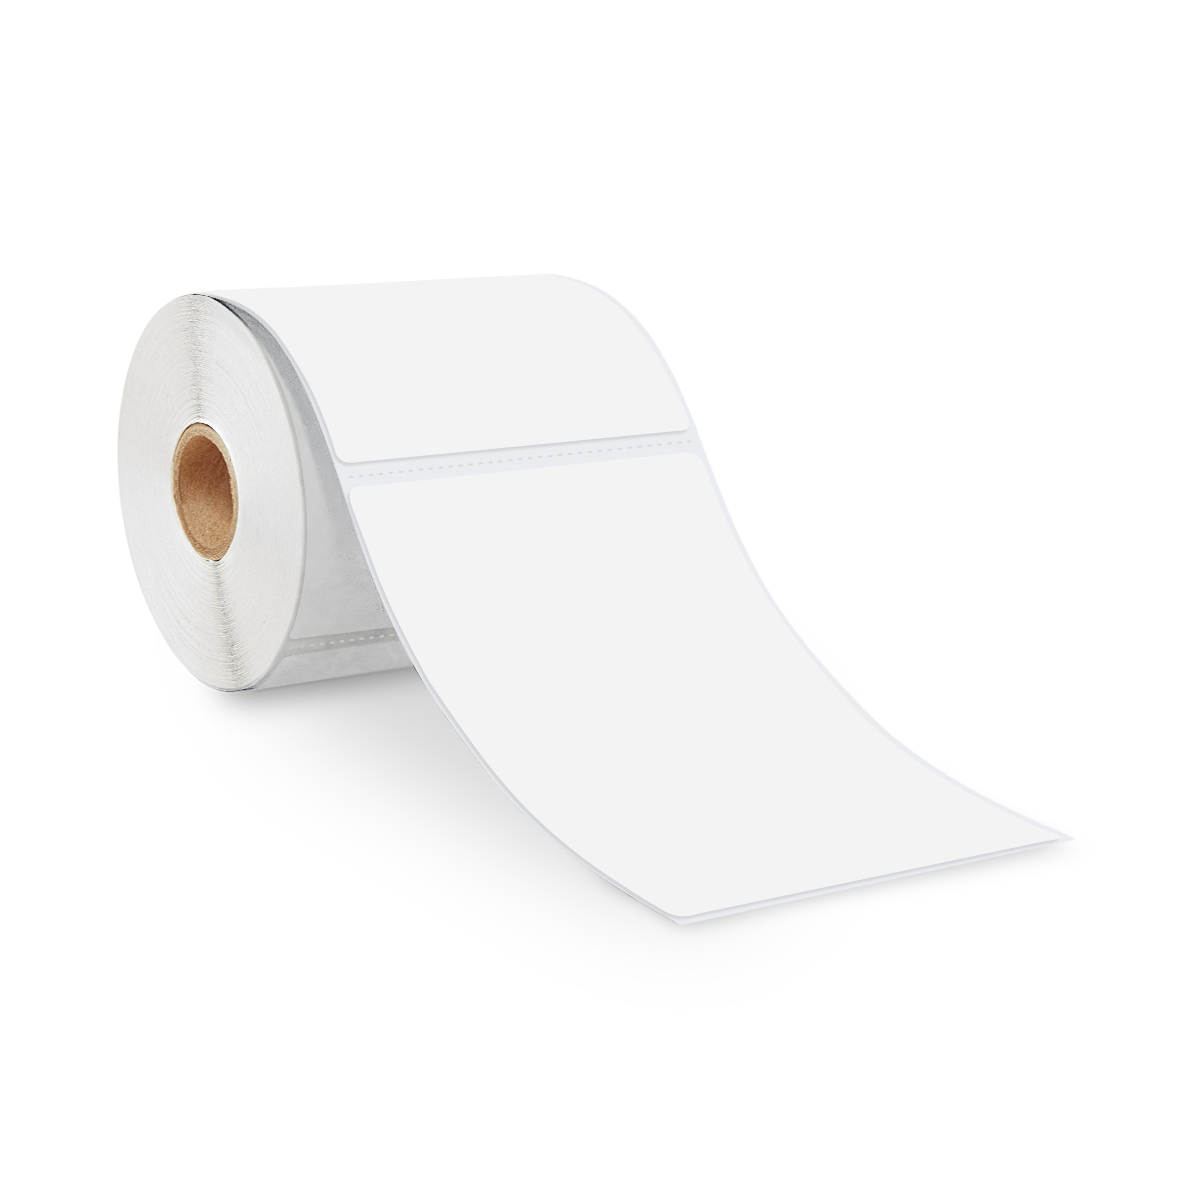 1 in Core - enKo Direct Thermal Labels Compatible for Zebra/Rollo 4 x 4 Label 6 Roll, 2100 Labels 